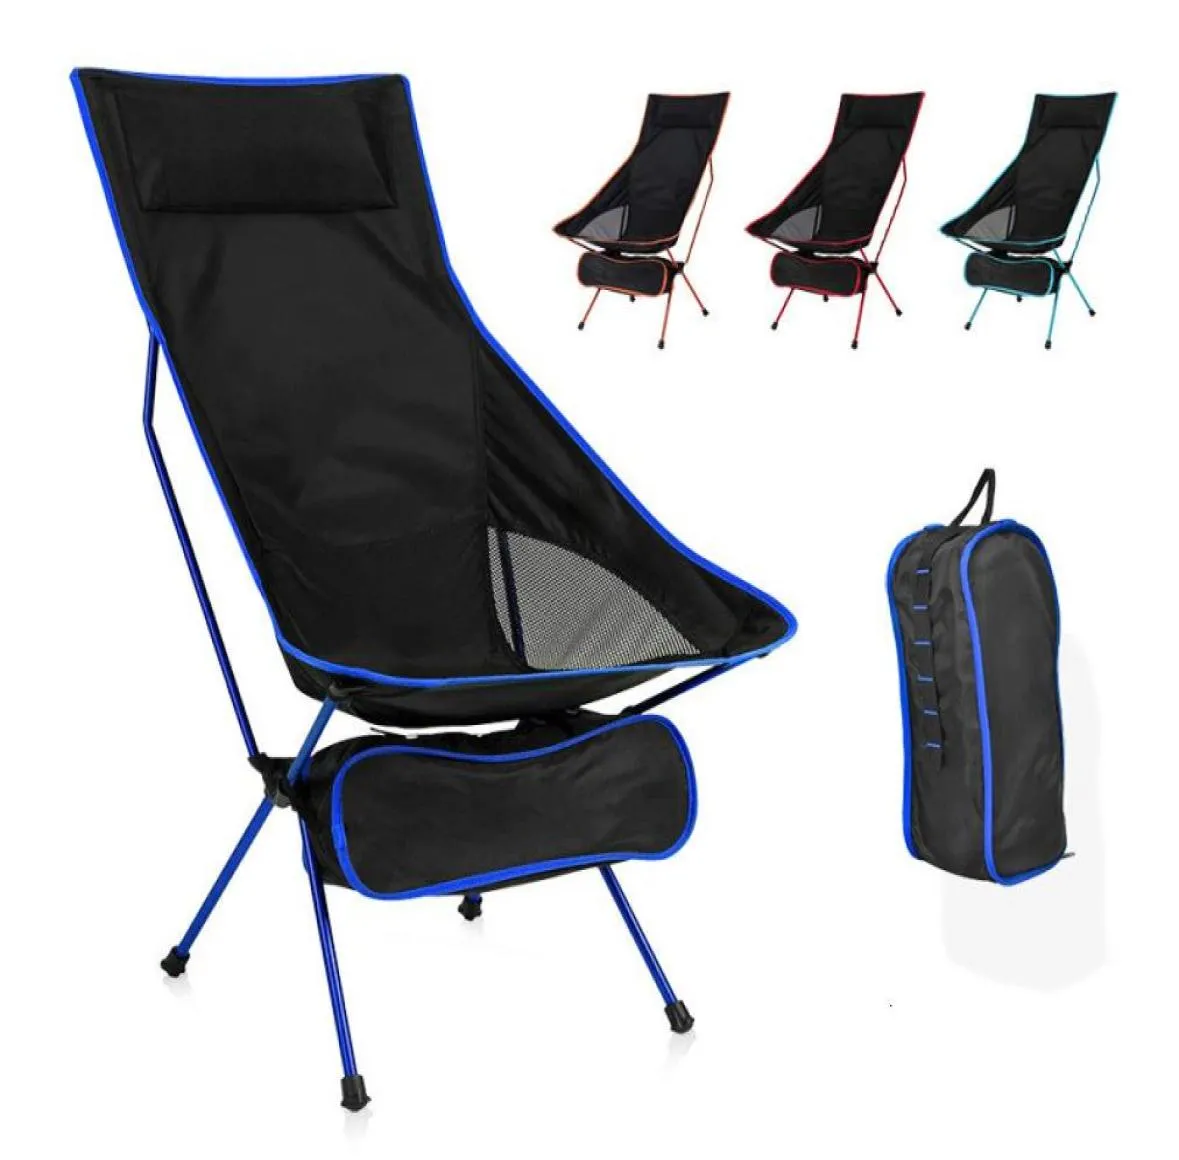 Camp Furniture Large Camping Chair Portable Foldable Outdoor Furniture Beach Chair BBQ Picnic Beach Ultralight Office Lunch Break 5146234